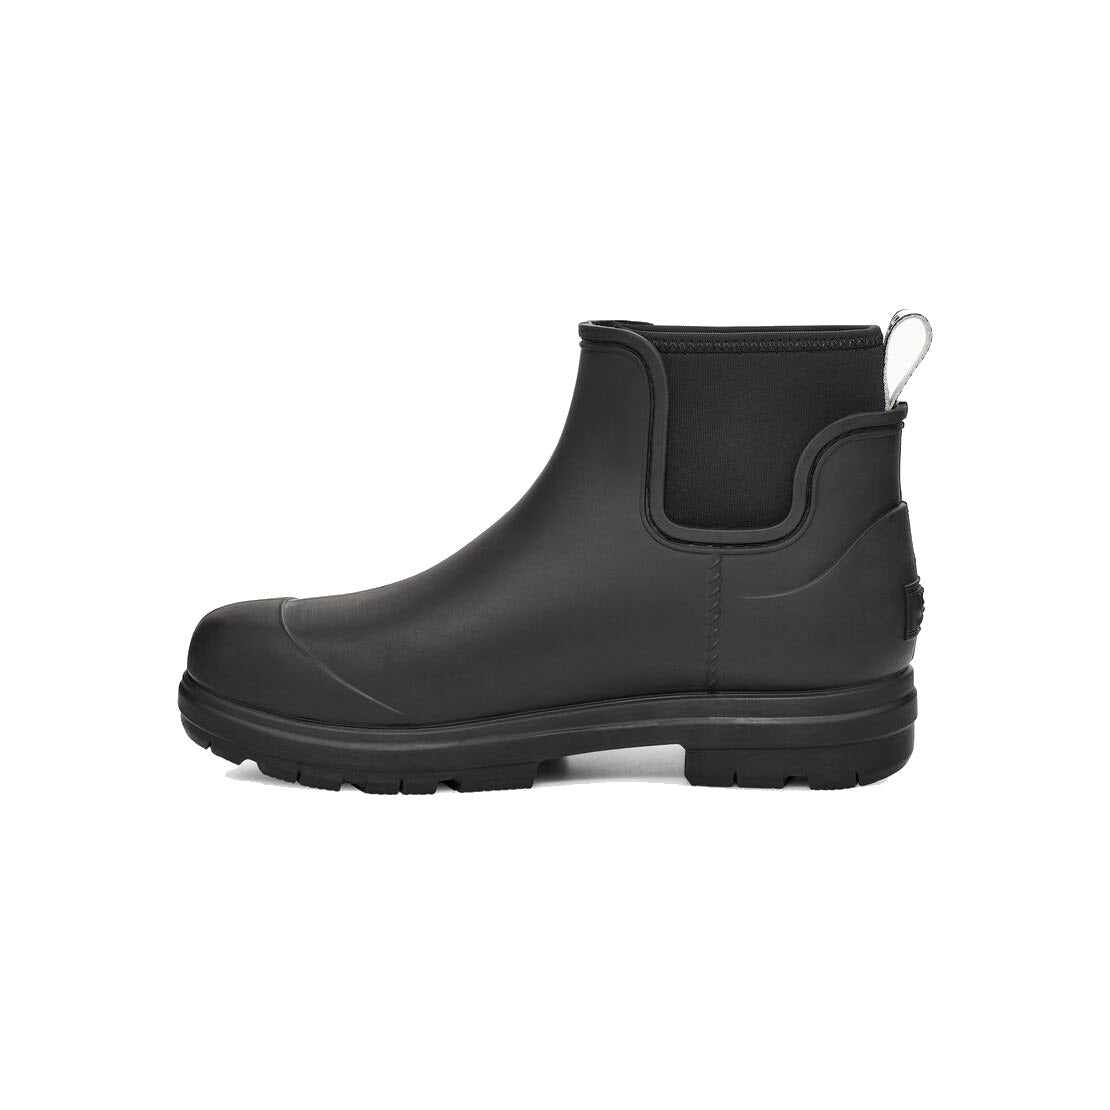 UGG DROPLET BLACK - WOMENS rainboot on a white background.